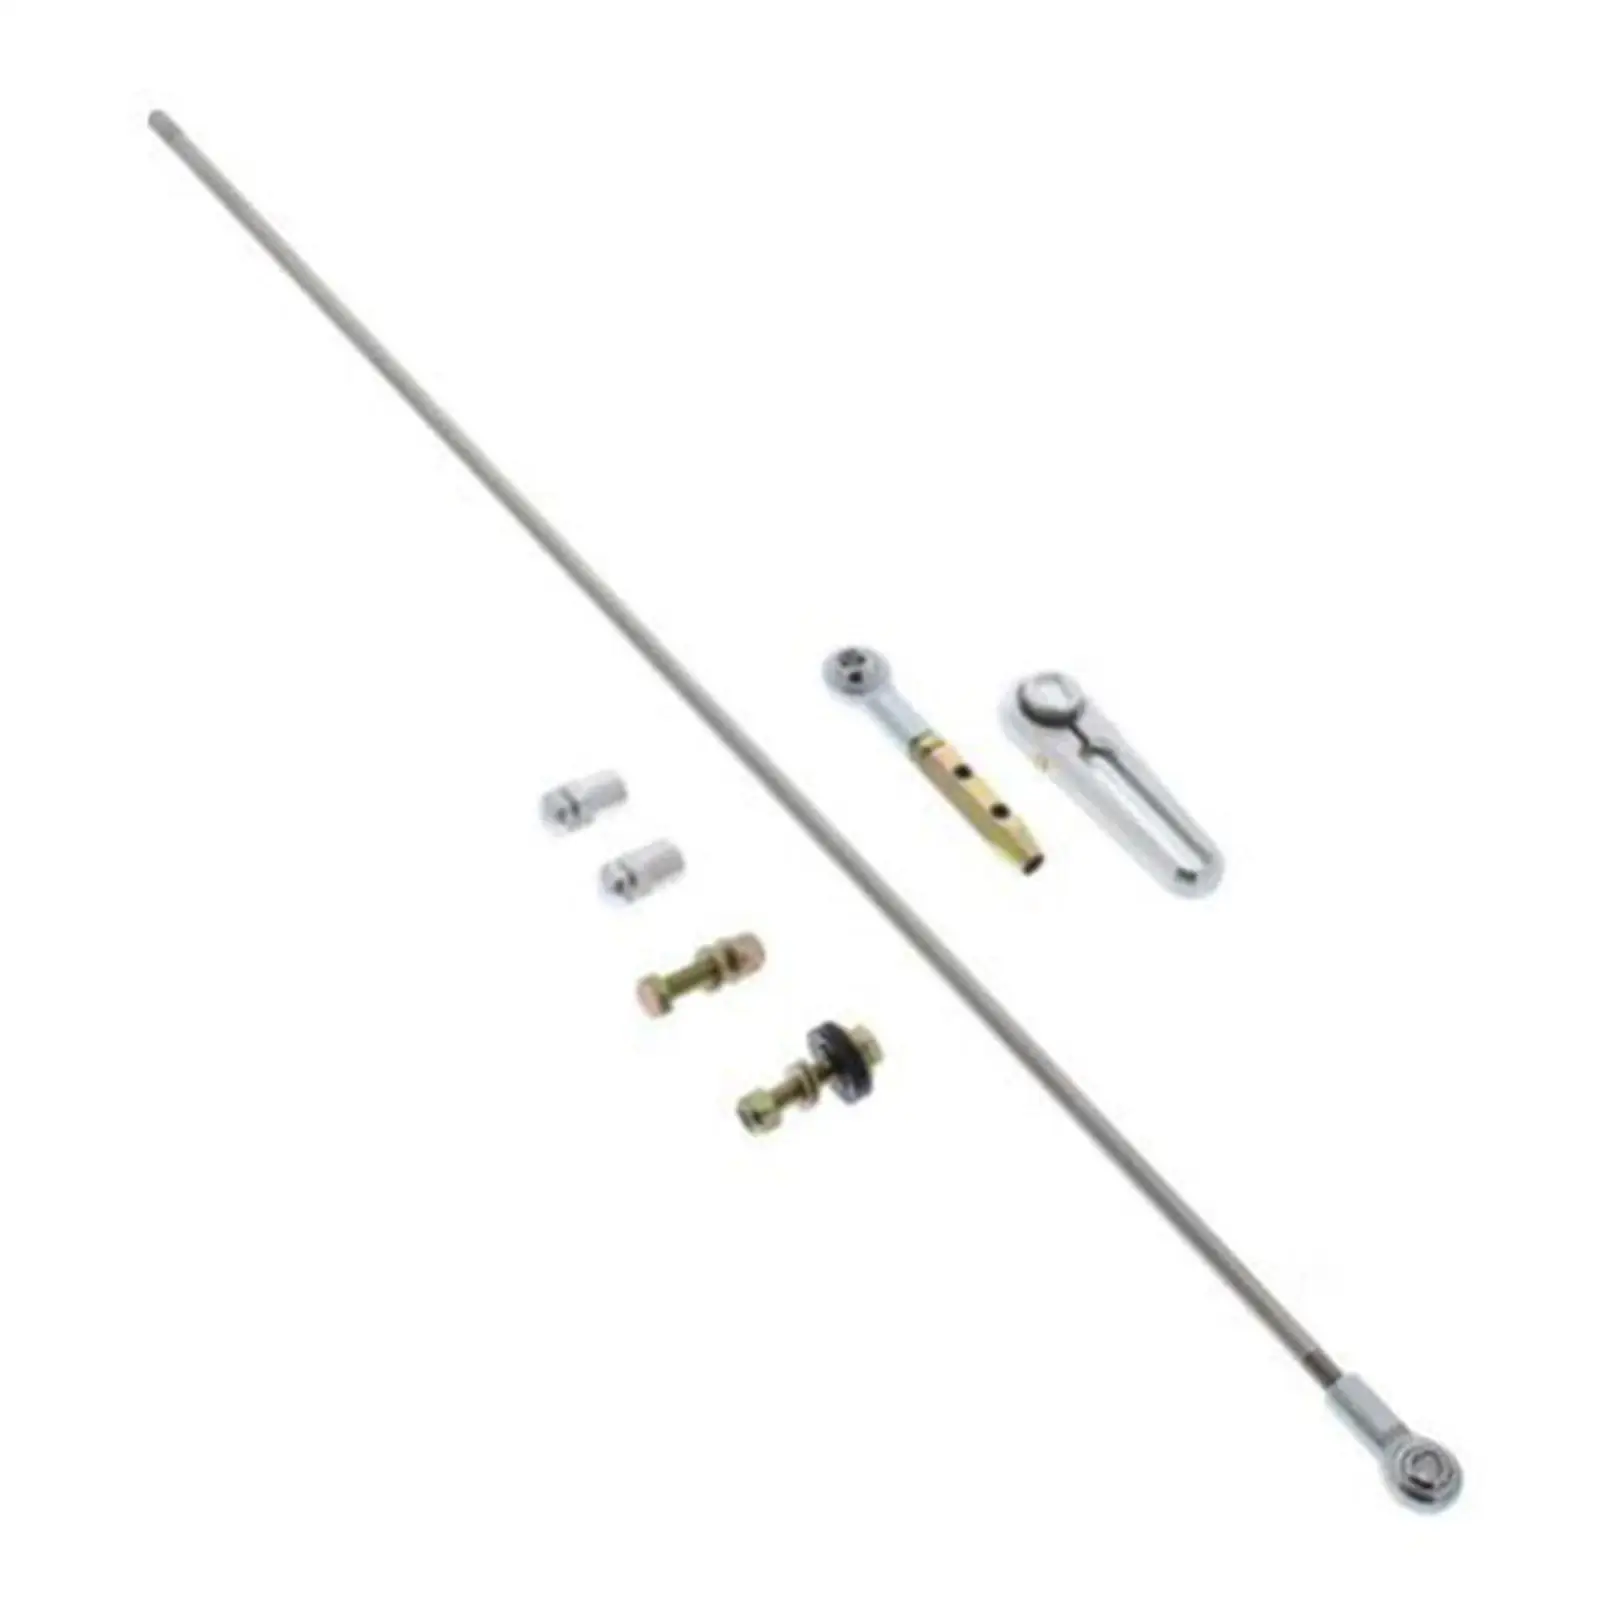 

Transmission Shift Linkage Kit Durable Replaces for GM 700R4 4L60